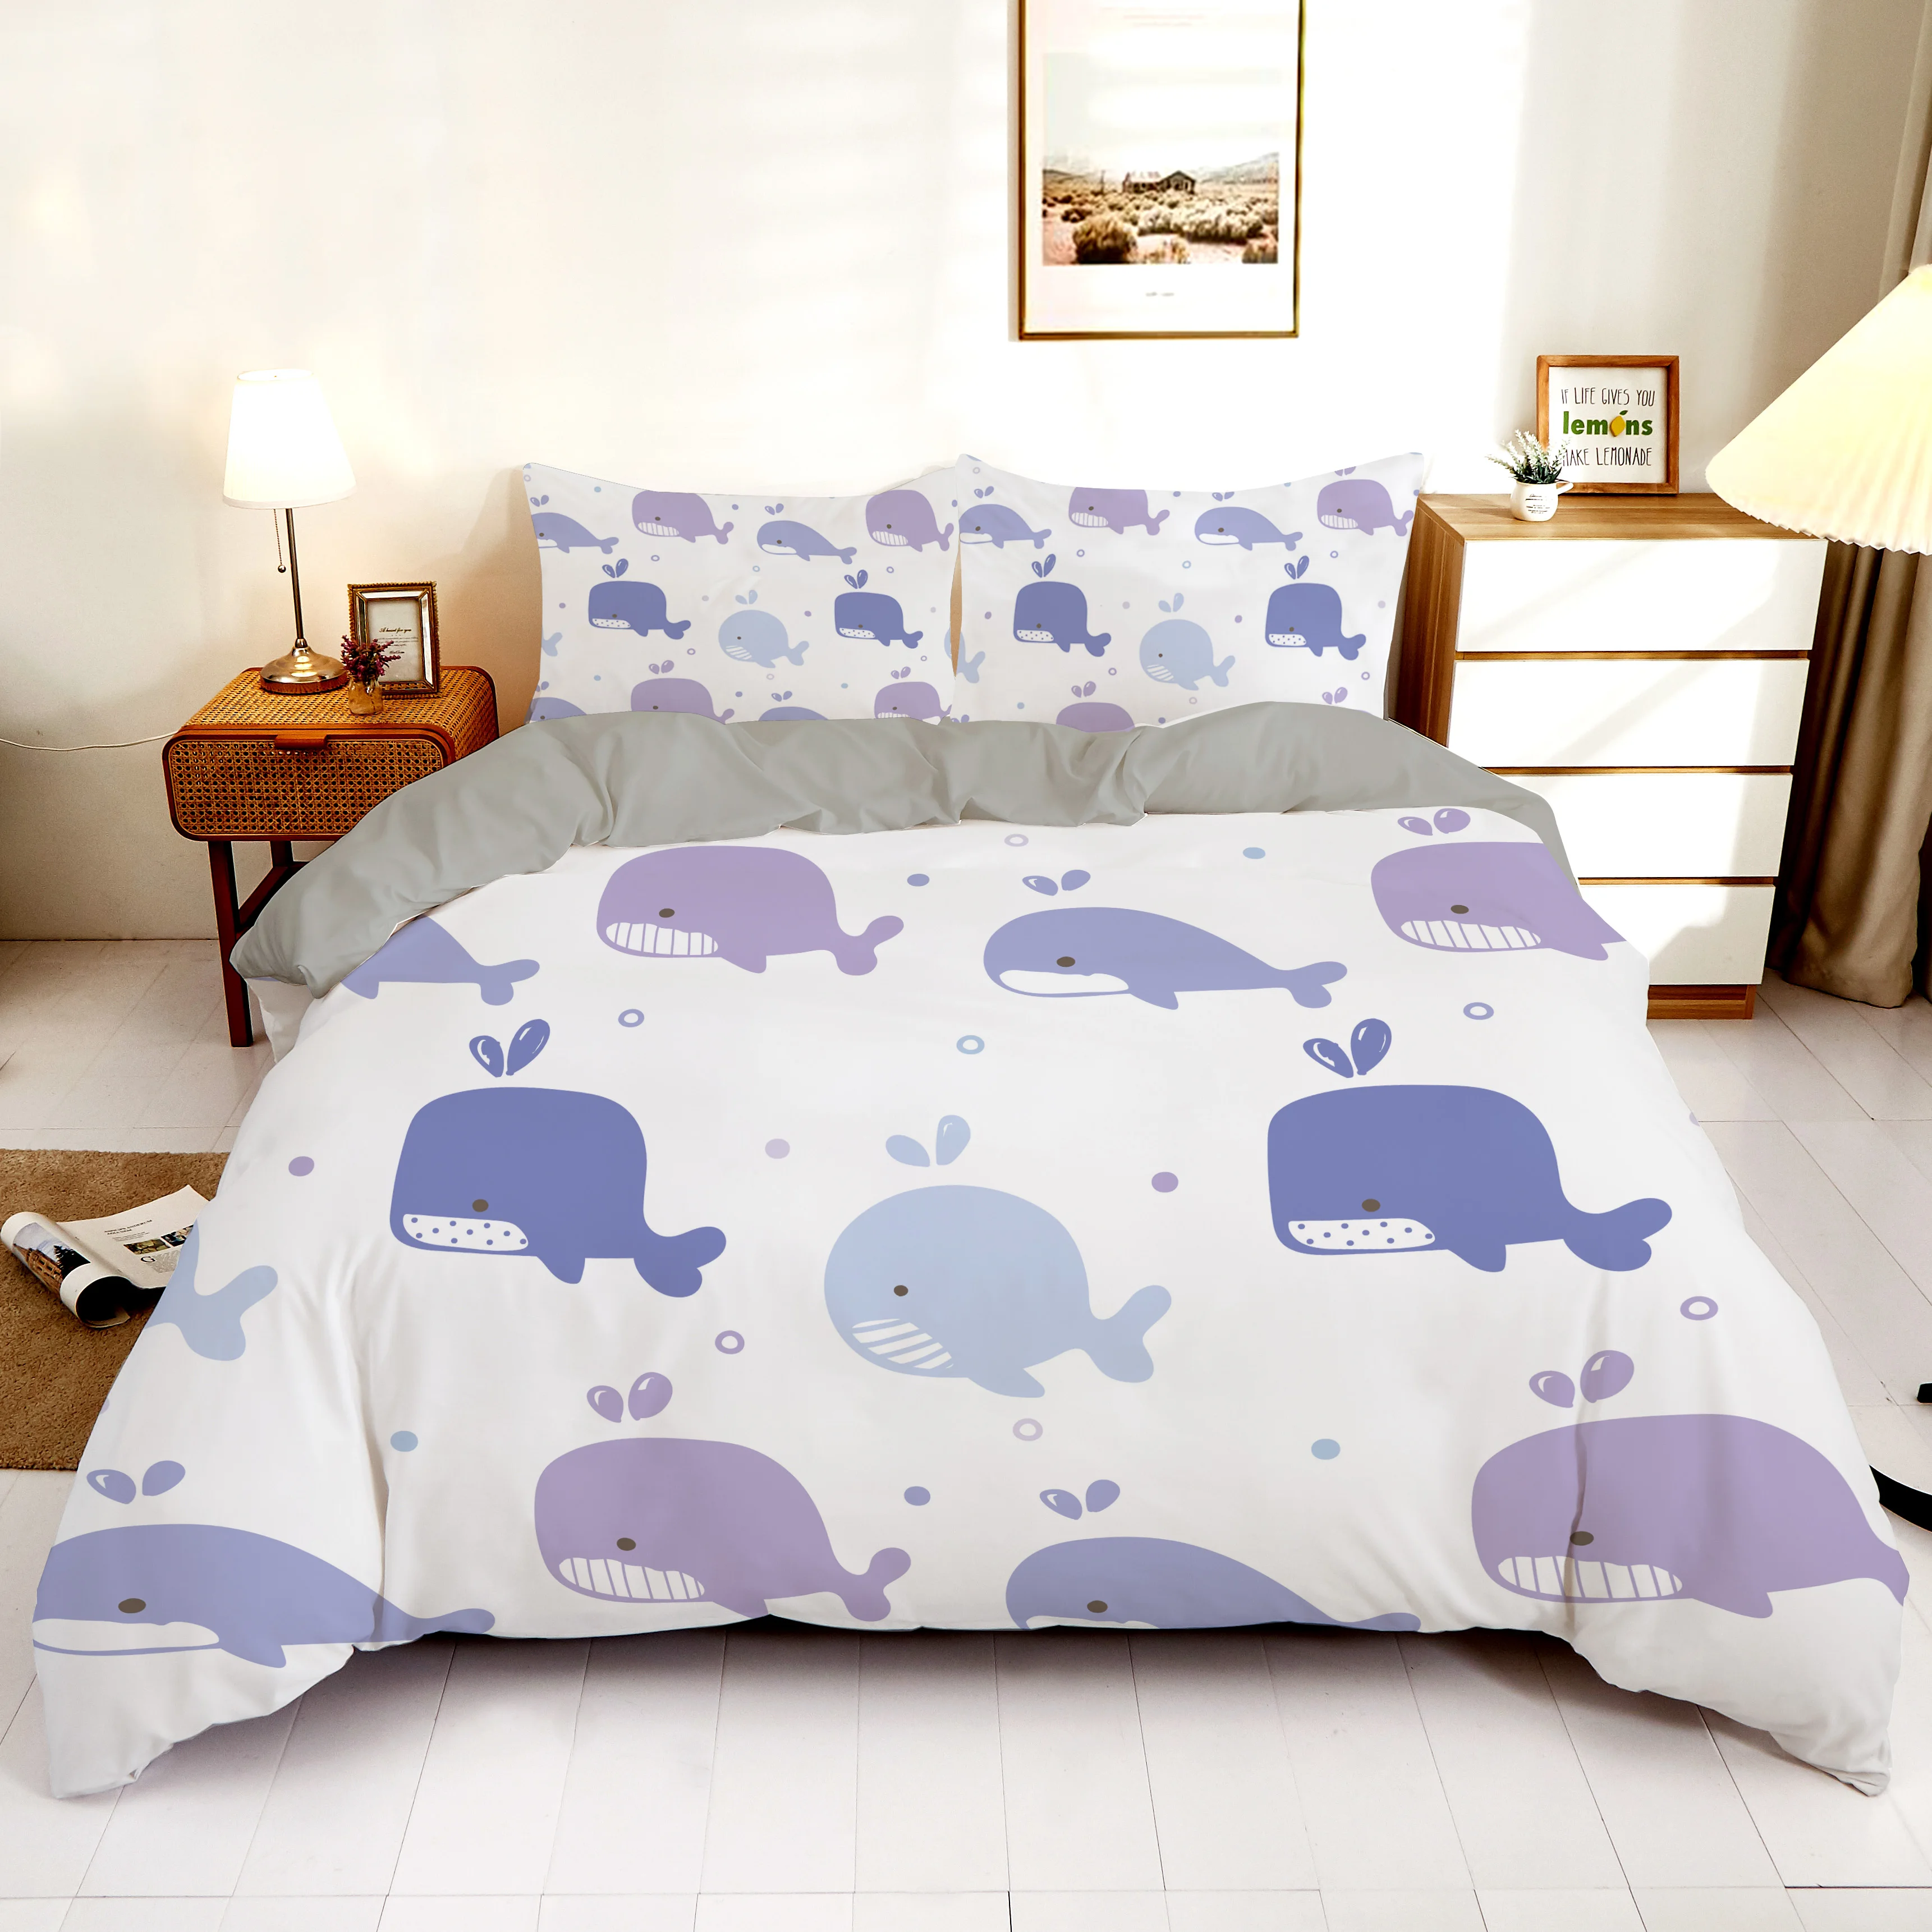 

The Underwater World Printed Bedding Set Fishes Whale Duvet Cover Queen 240x220 2/3Pcs King Twin Size Quiet Sets For Child Home